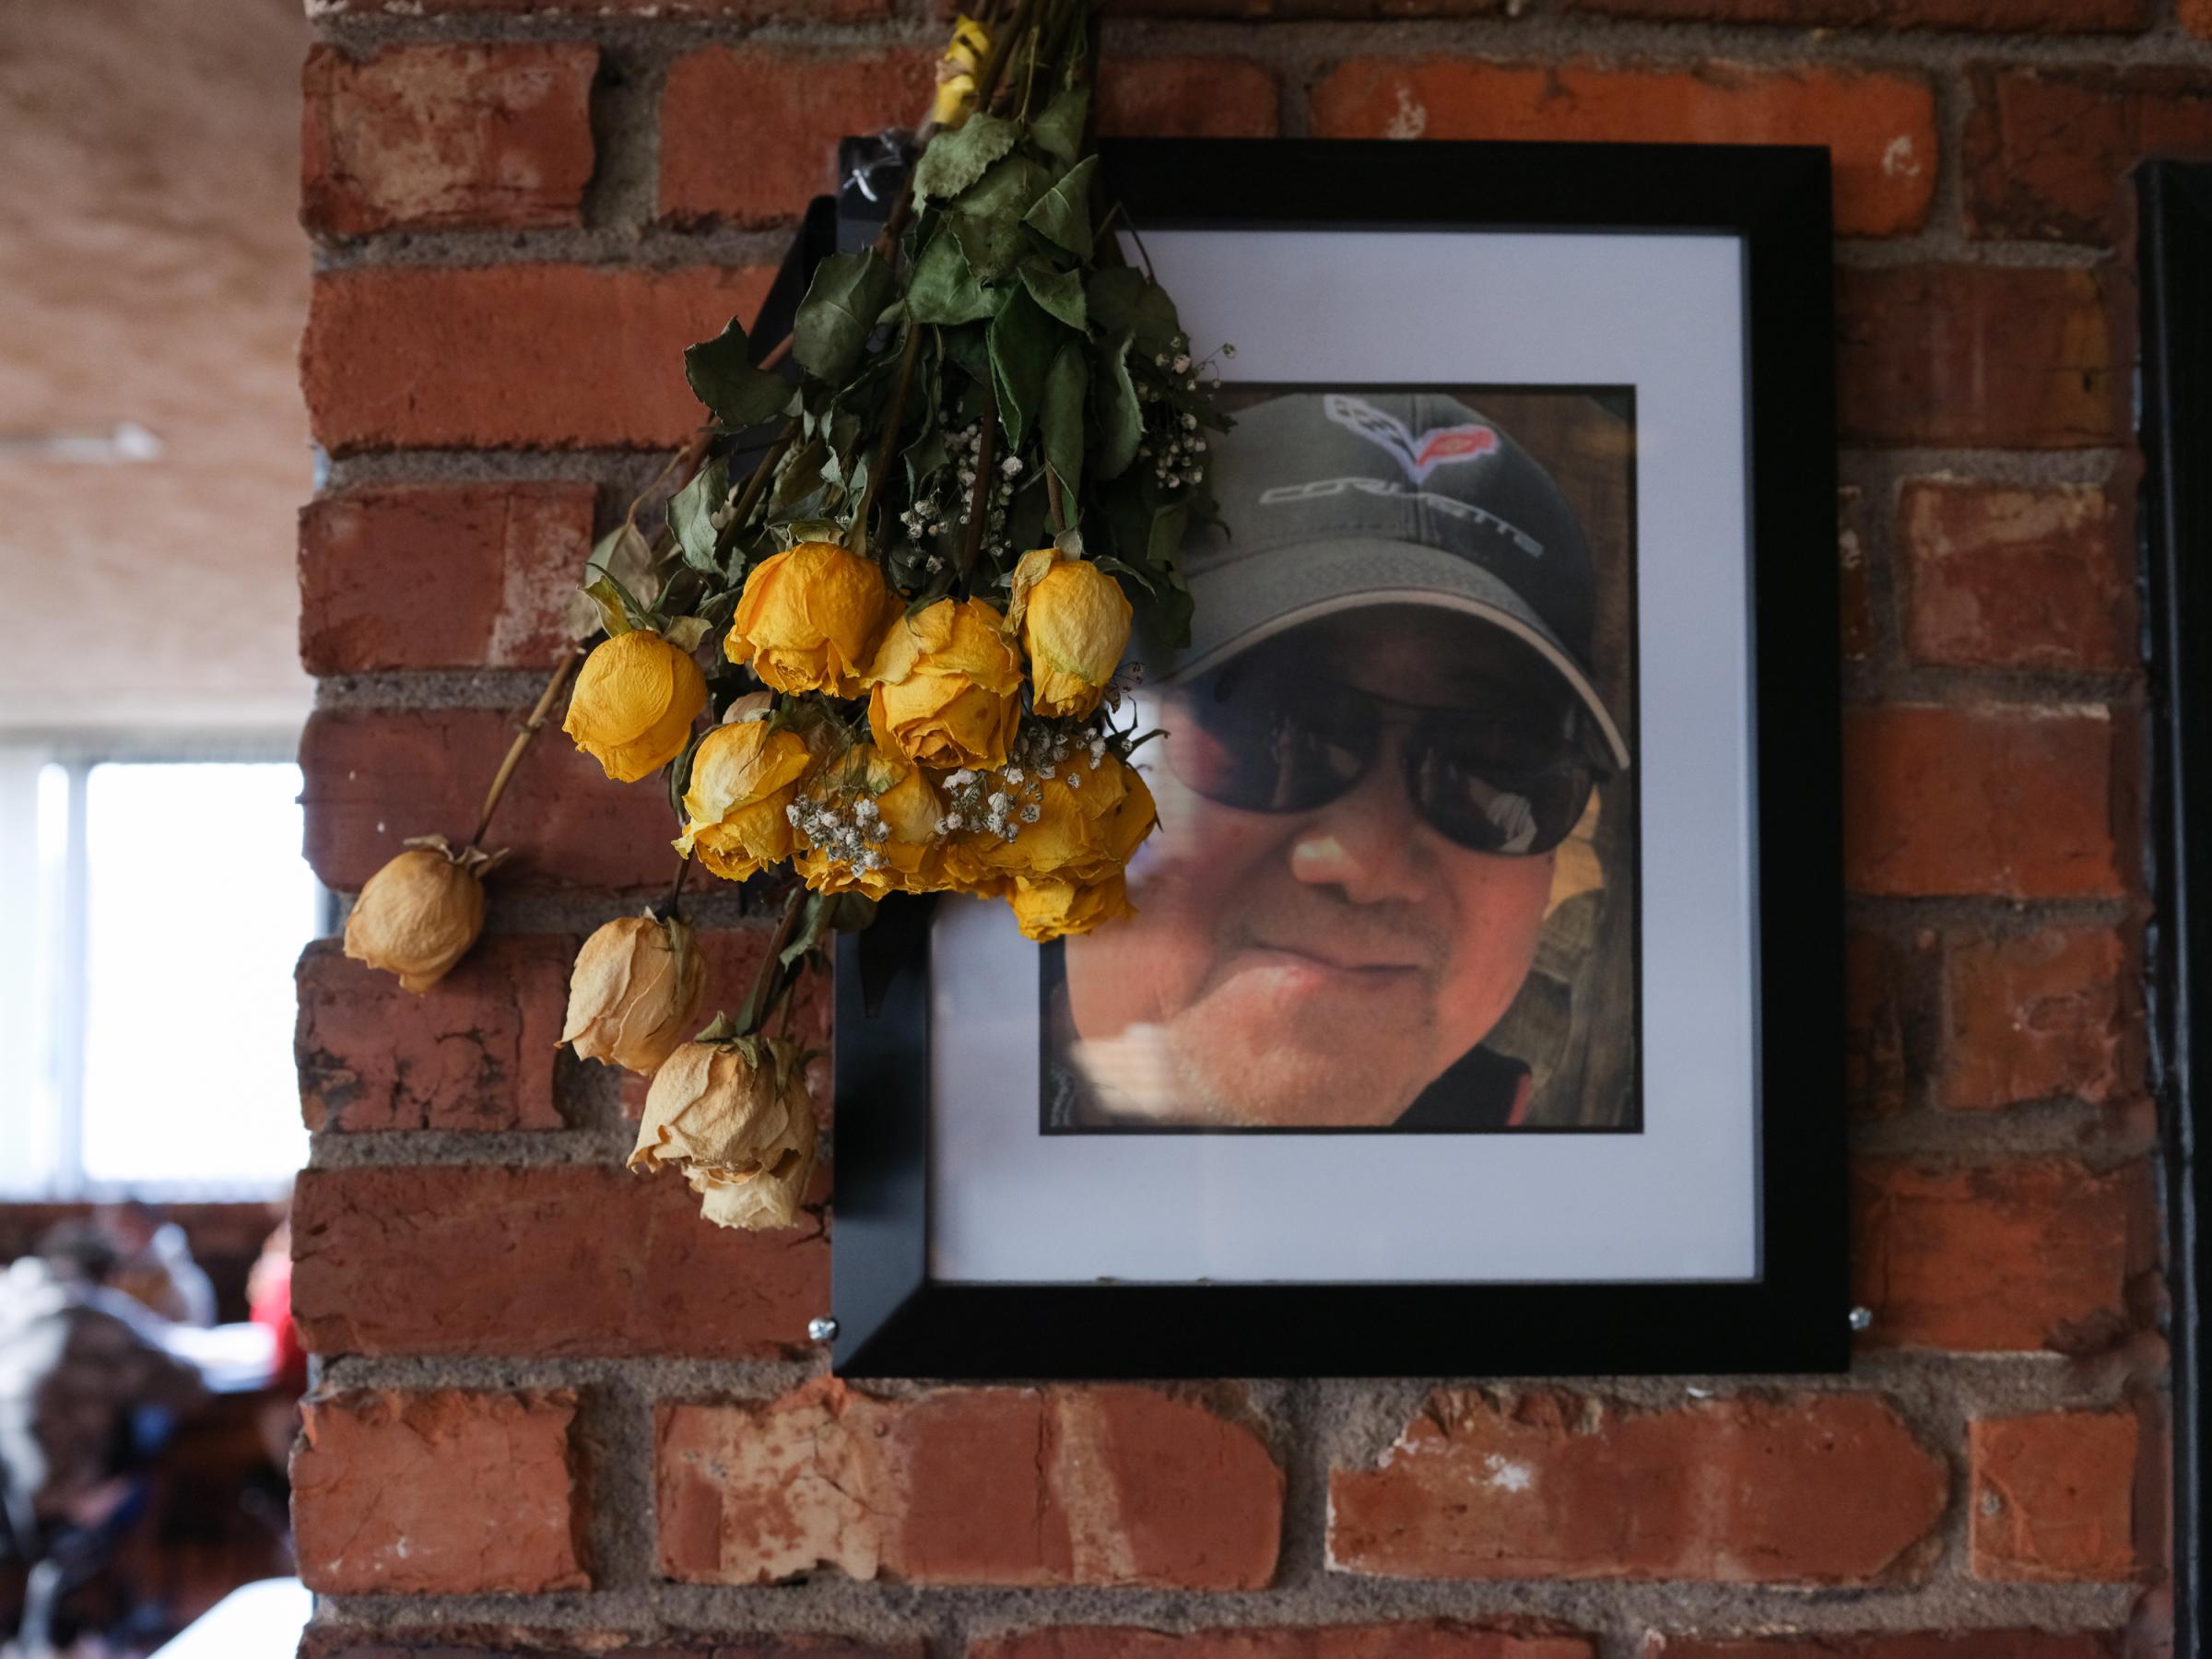 PAPILLION, NE - MARCH 18, 2022: Ming Wang&#39;s portrait hangs next to dried yellow flowers from Ming Wang&#39;s funeral inside of Ming&#39;s Restaurant in Papillion, Nebraska on March 18, 2022. (Photo by Arin Yoon for The Washington Post) Papillion United States